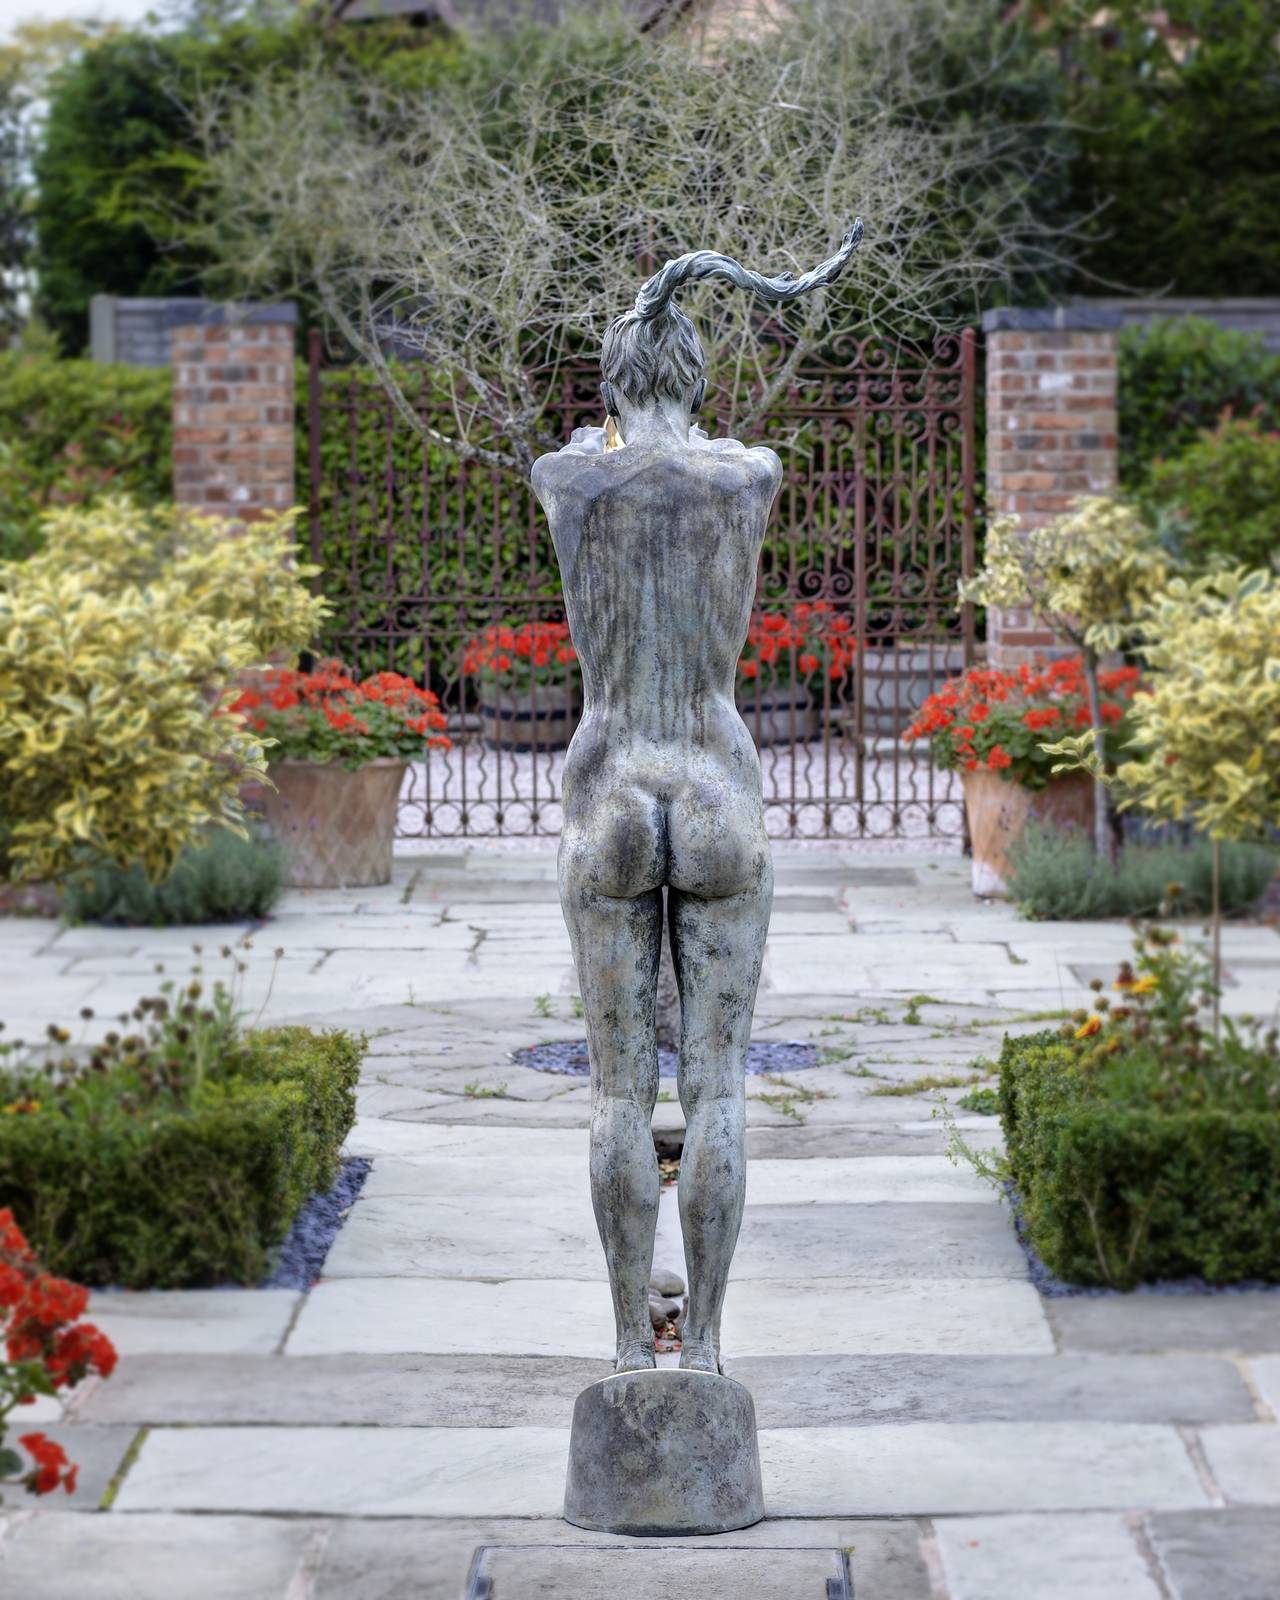 'Circe'  was inspired around Greek Myth involving the Goddess of Magic. The sculpture is a stunning Life-size Solid Bronze Nude Figure by Carl Payne.

Art has played a large part in Carl's academic work taking through Burslem School of Art, the